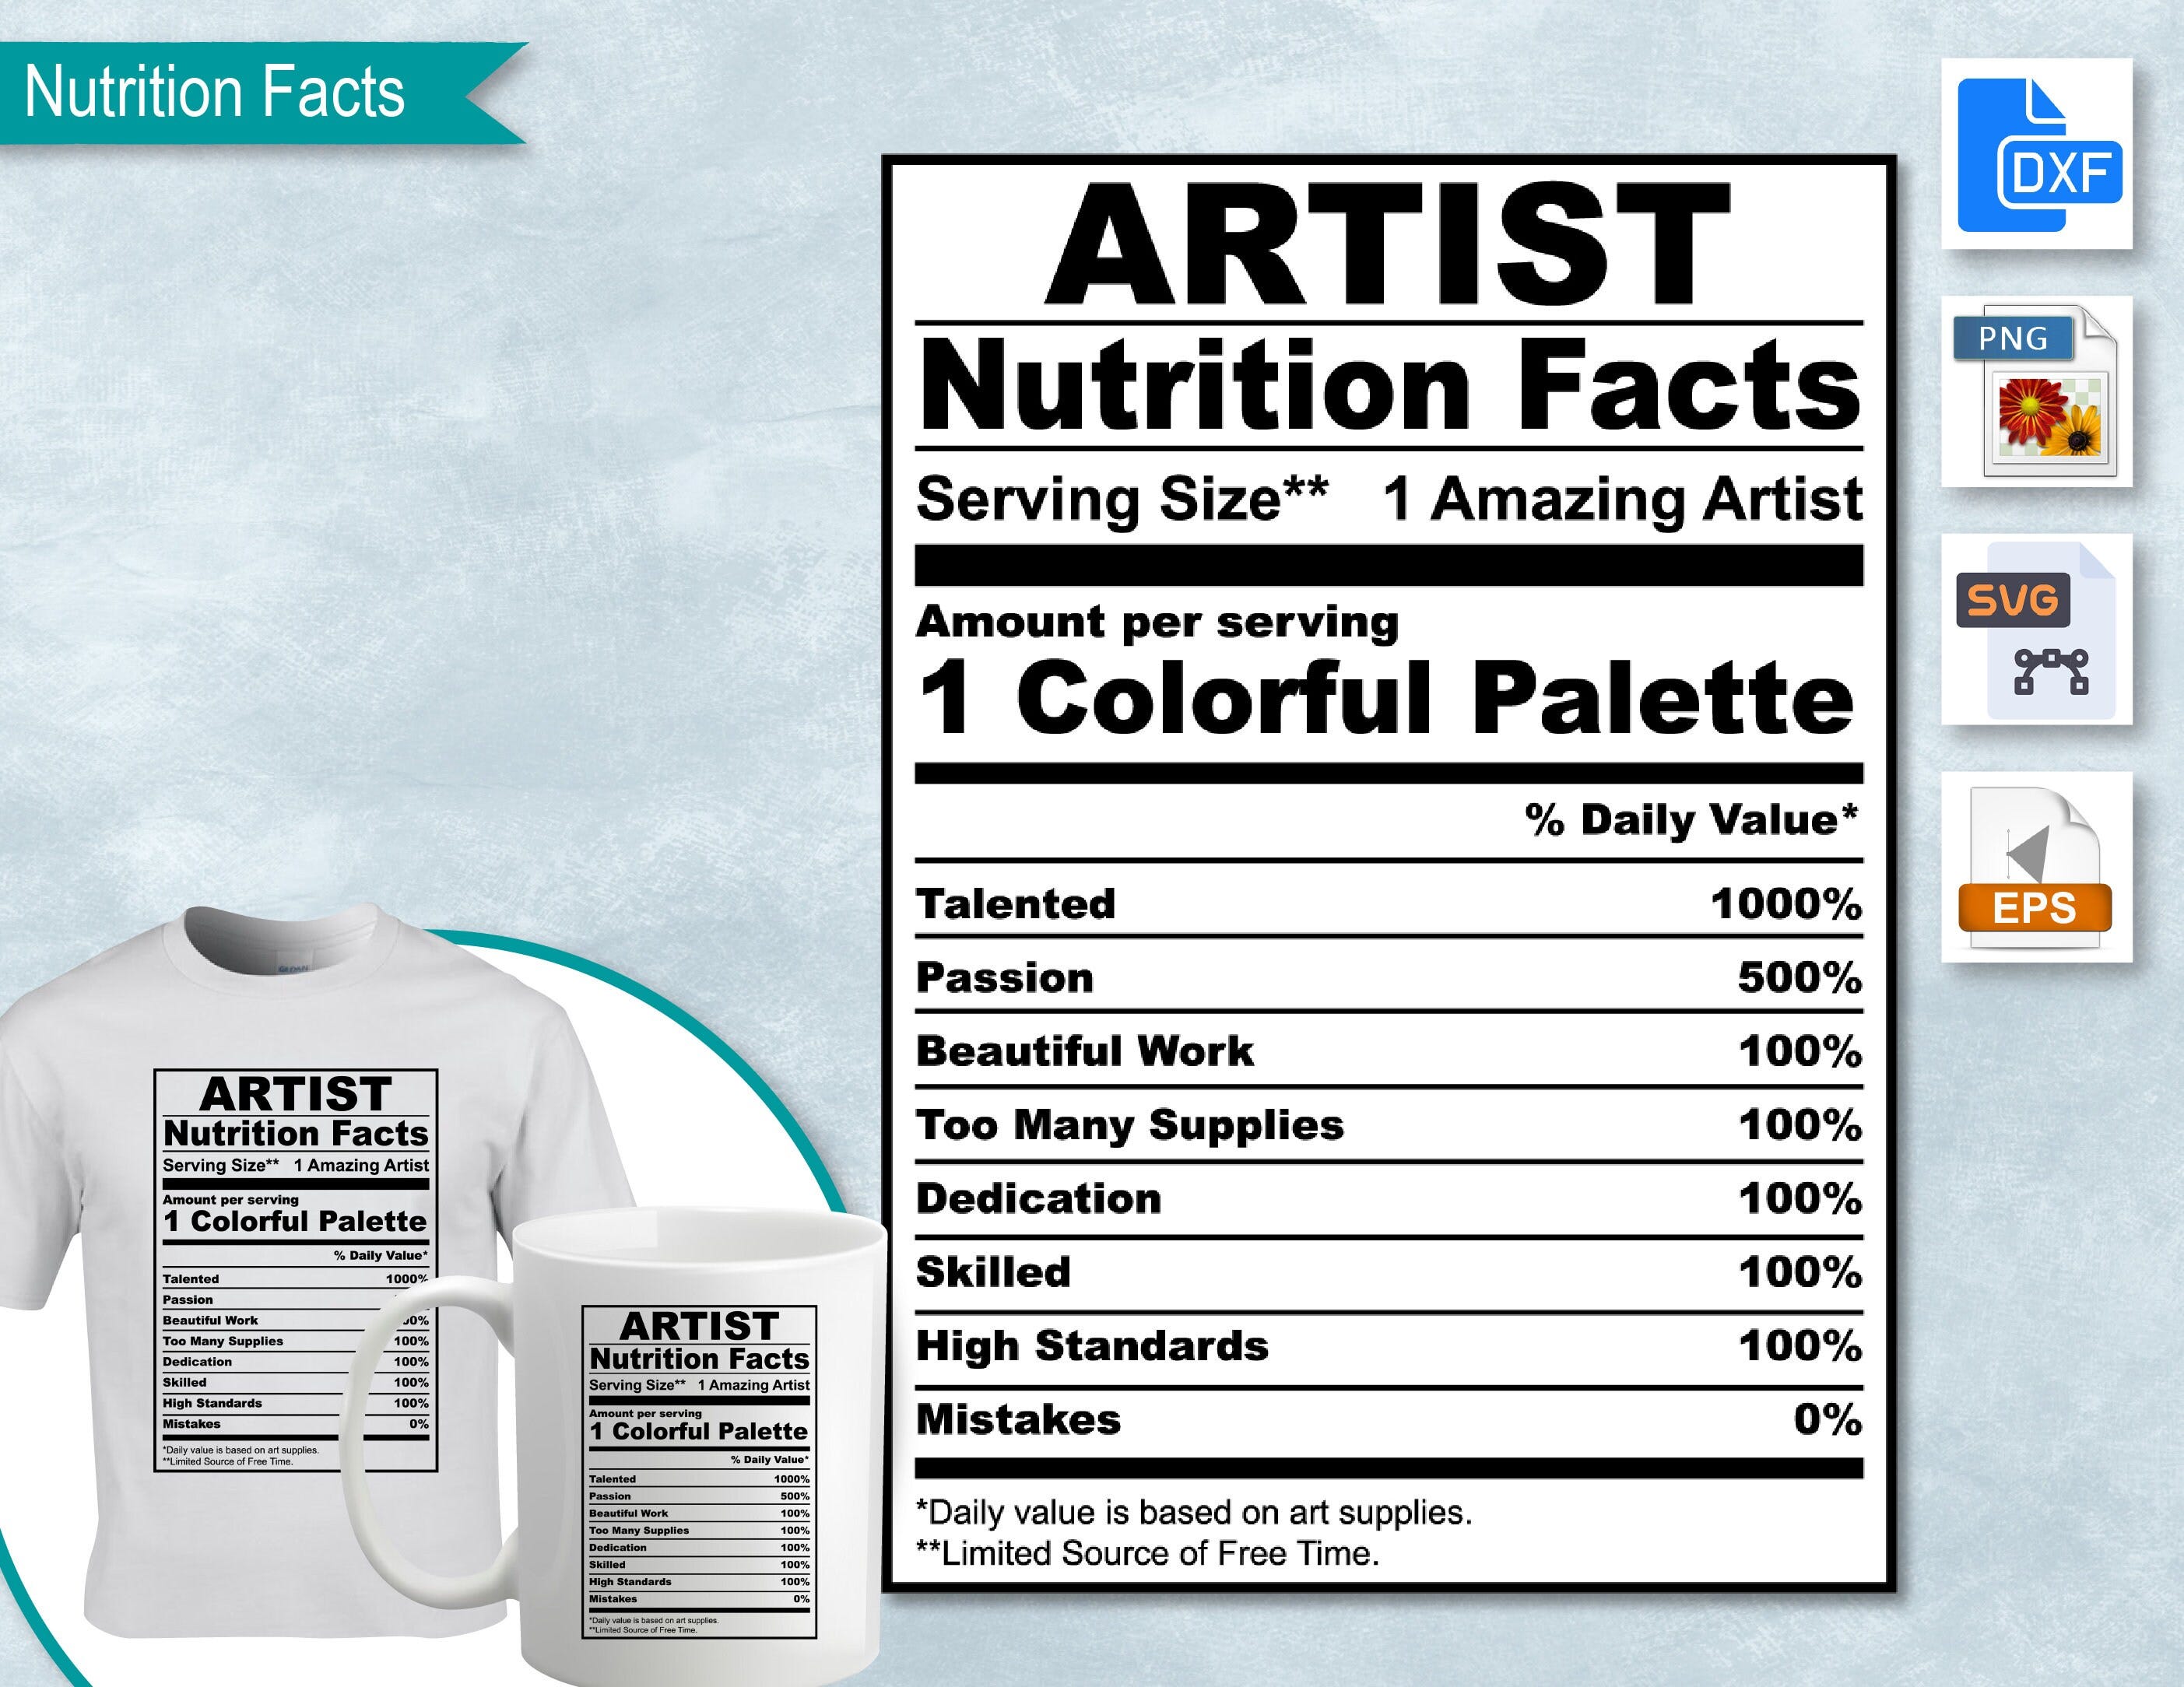 Artist Nutrition Facts, SVG Nutritional Fact Label Template, Printable, DIY, Eps, PNG, SvG, DxF, Cricut, Silhouette